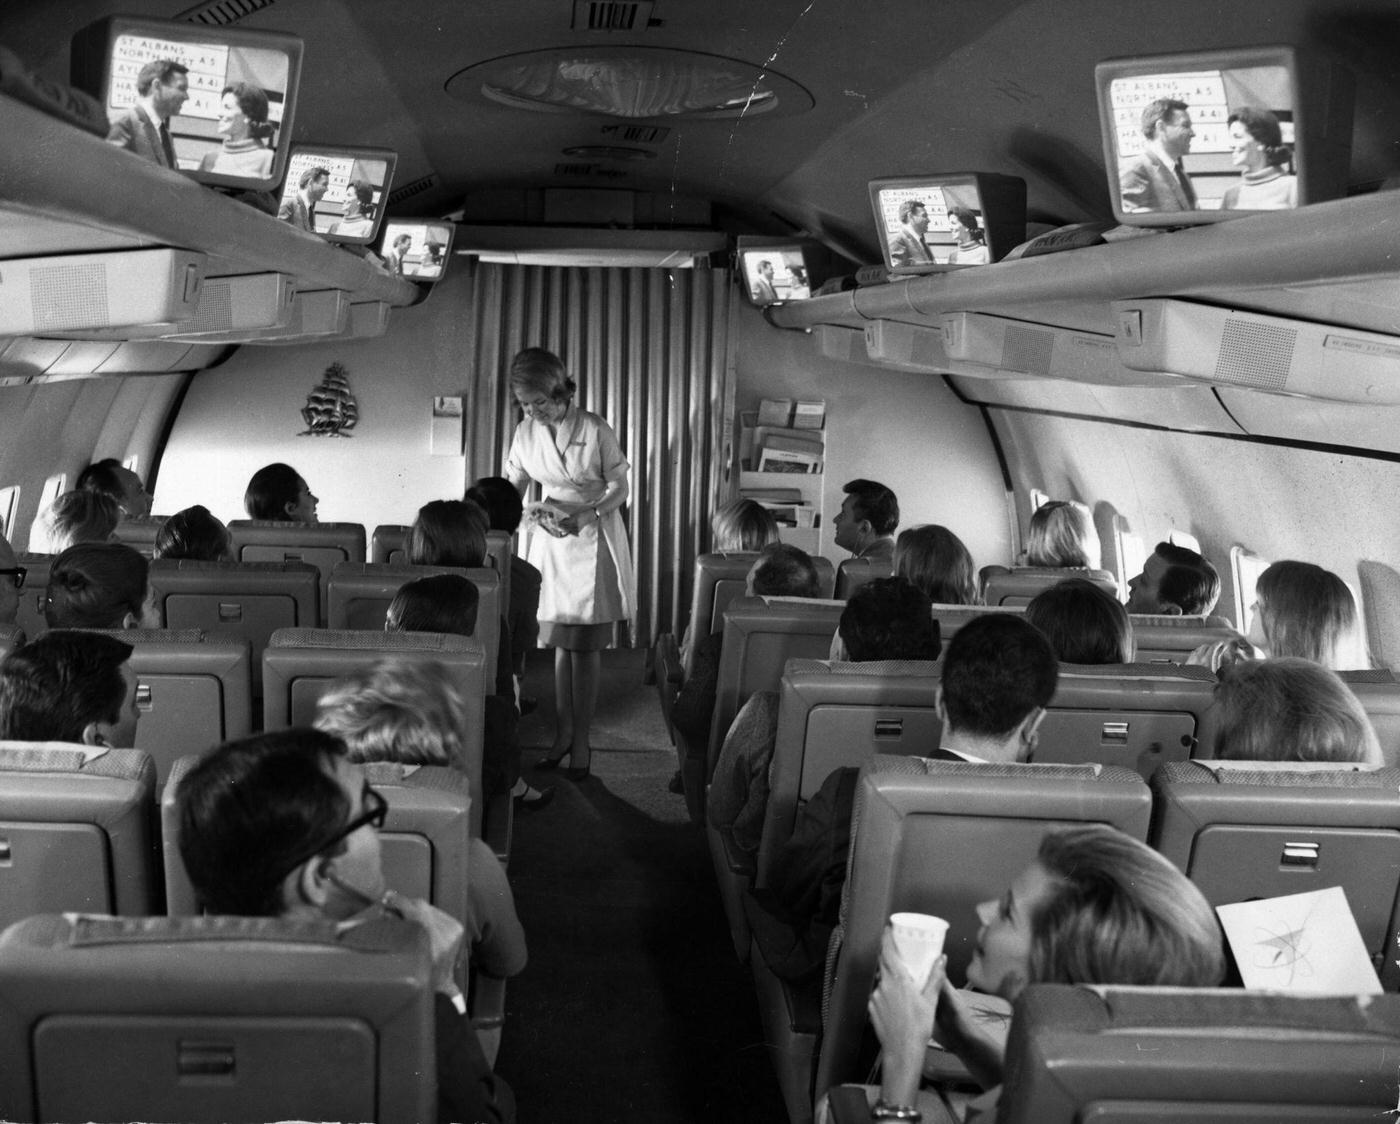 Test flight of a new Pan American Airlines plane fitted with television sets in the hand luggage racks for the entertainment of passengers, 1965.